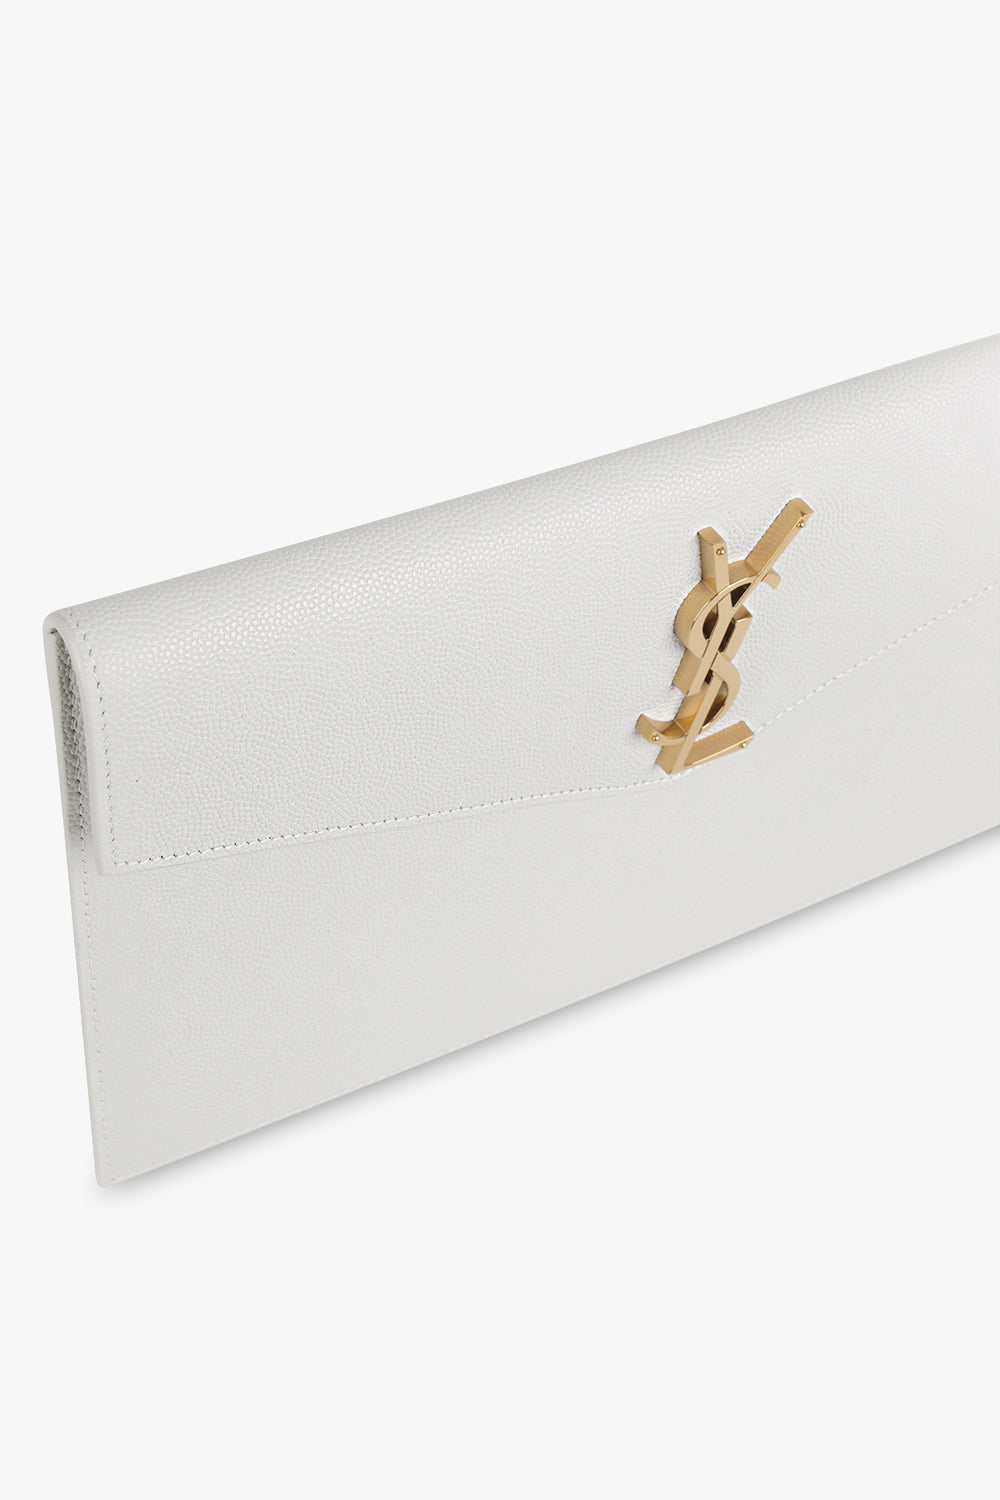 SAINT LAURENT SMALL LEATHER GOODS WHITE UPTOWN POUCH GRAINED LEATHER CREMA SOFT